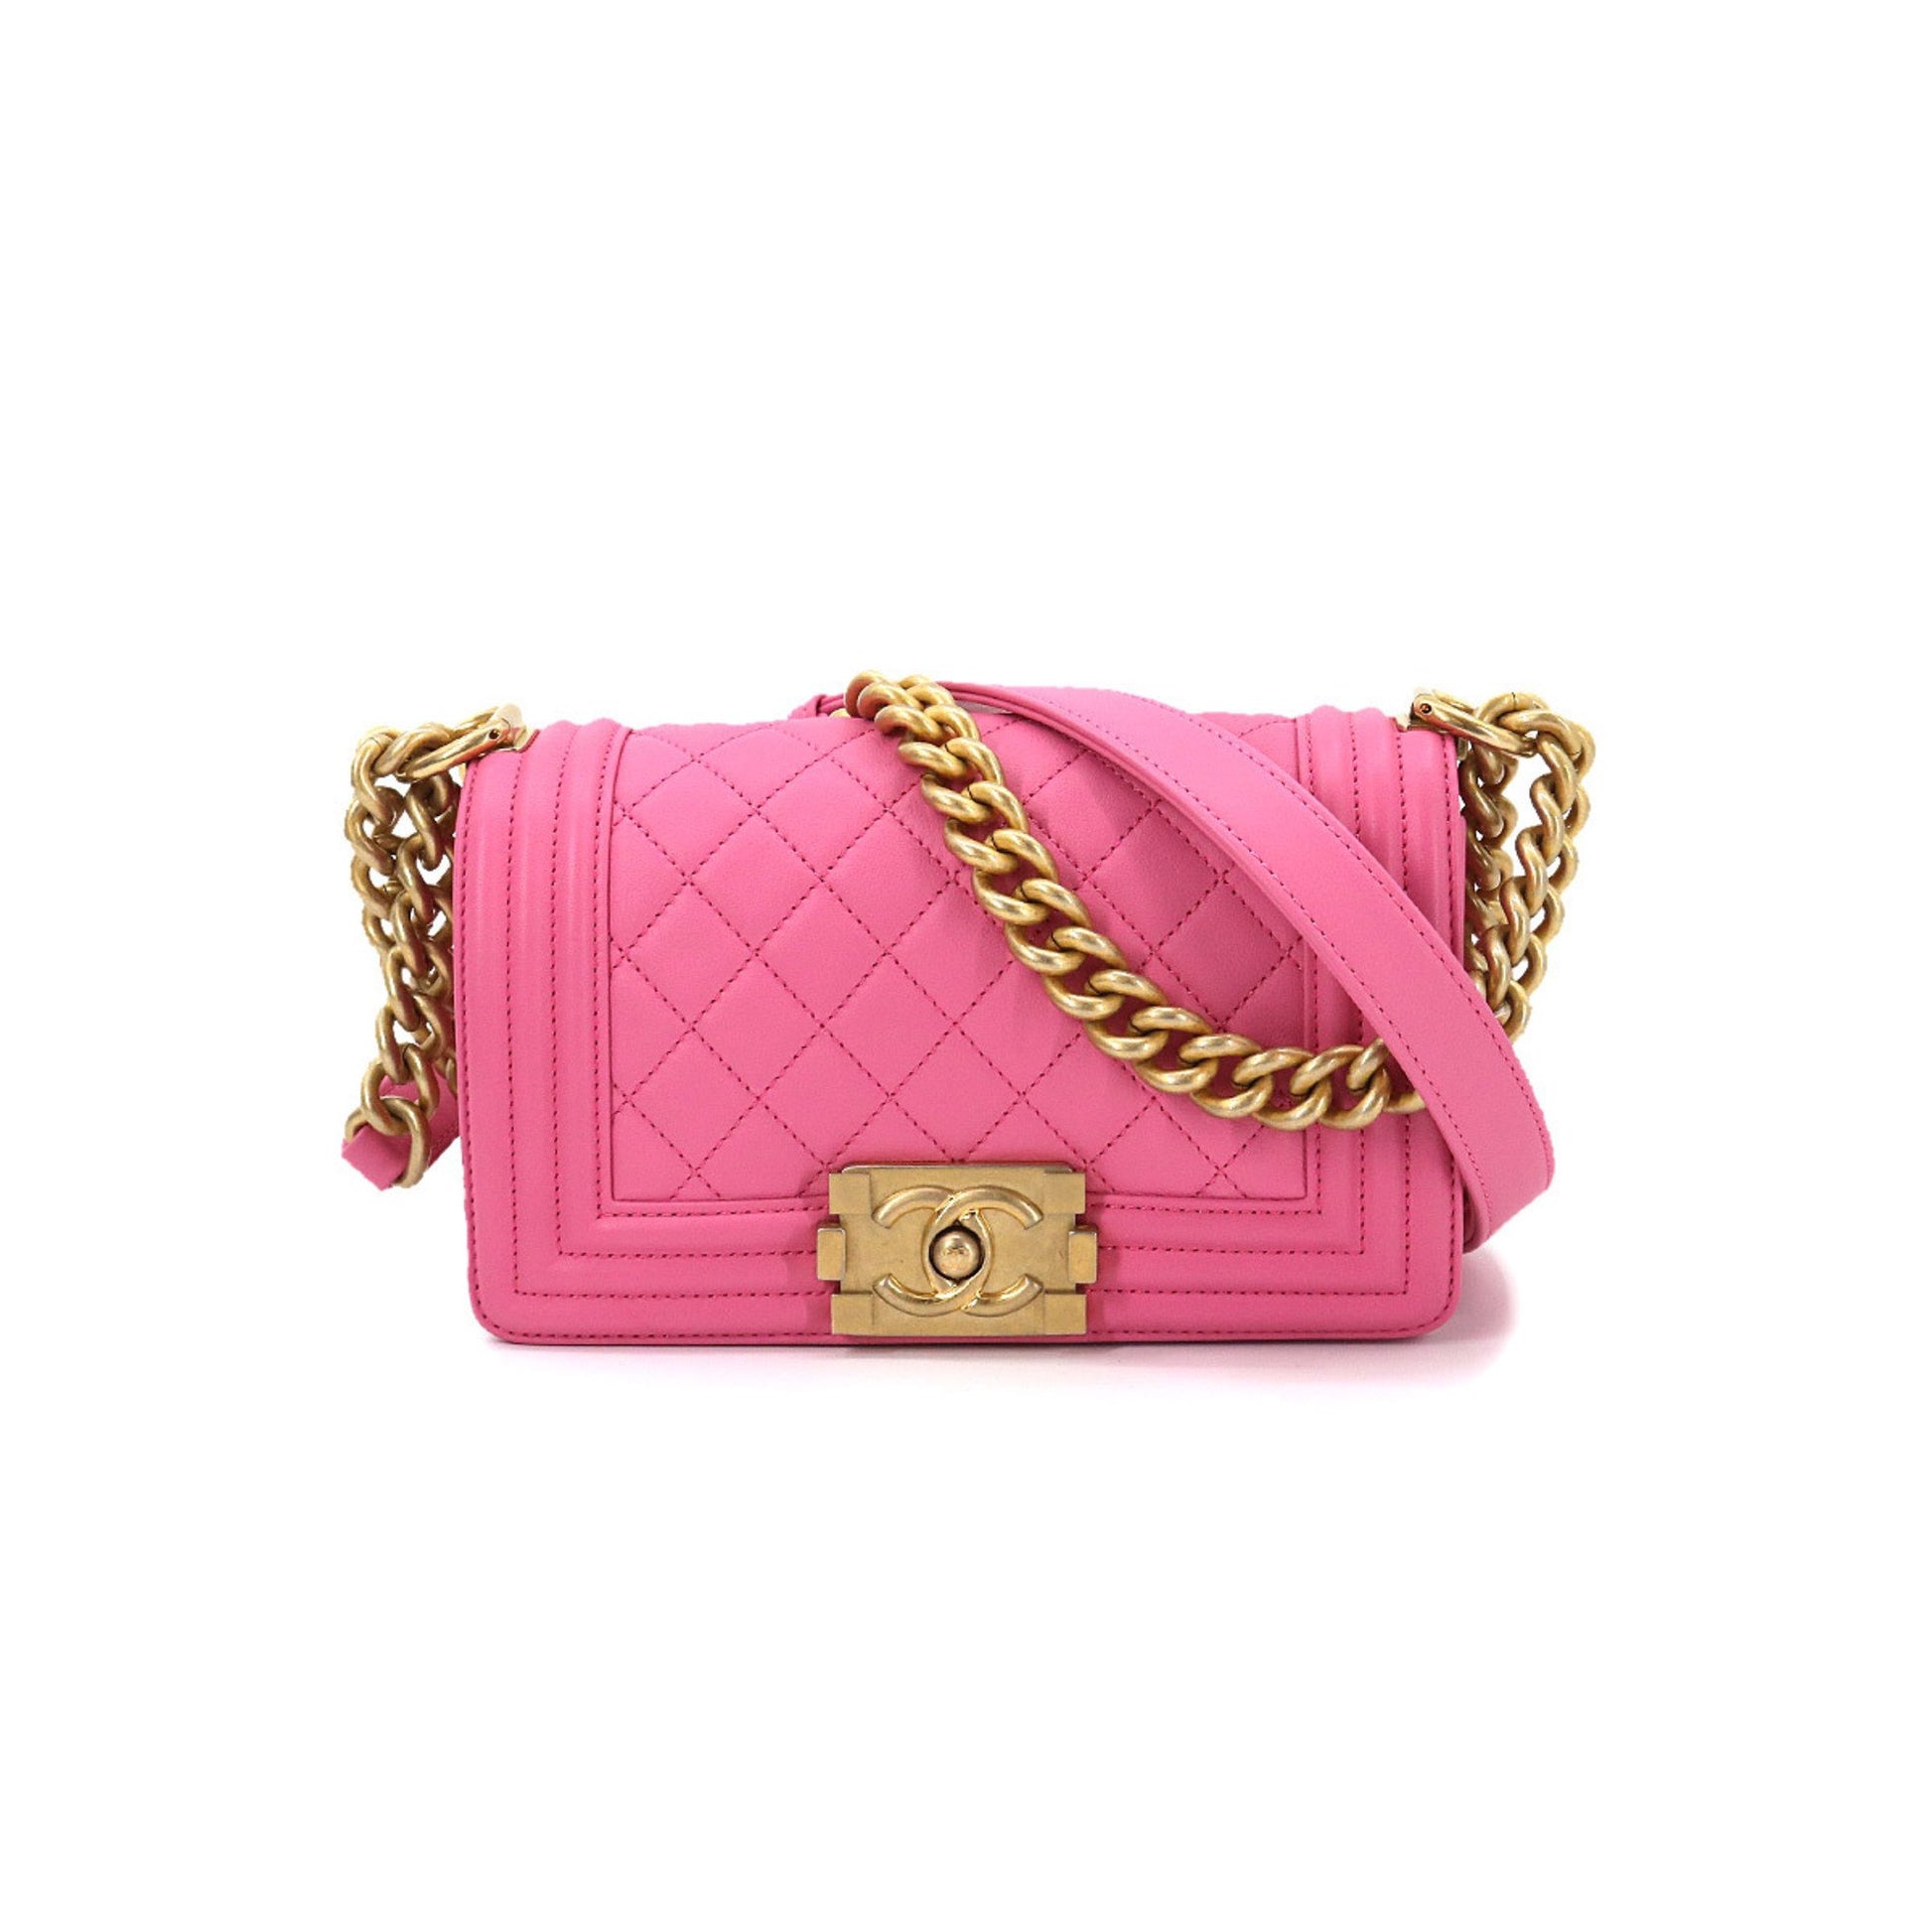 Chanel boy small chain shoulder bag leather pink A67085 gold metal fit